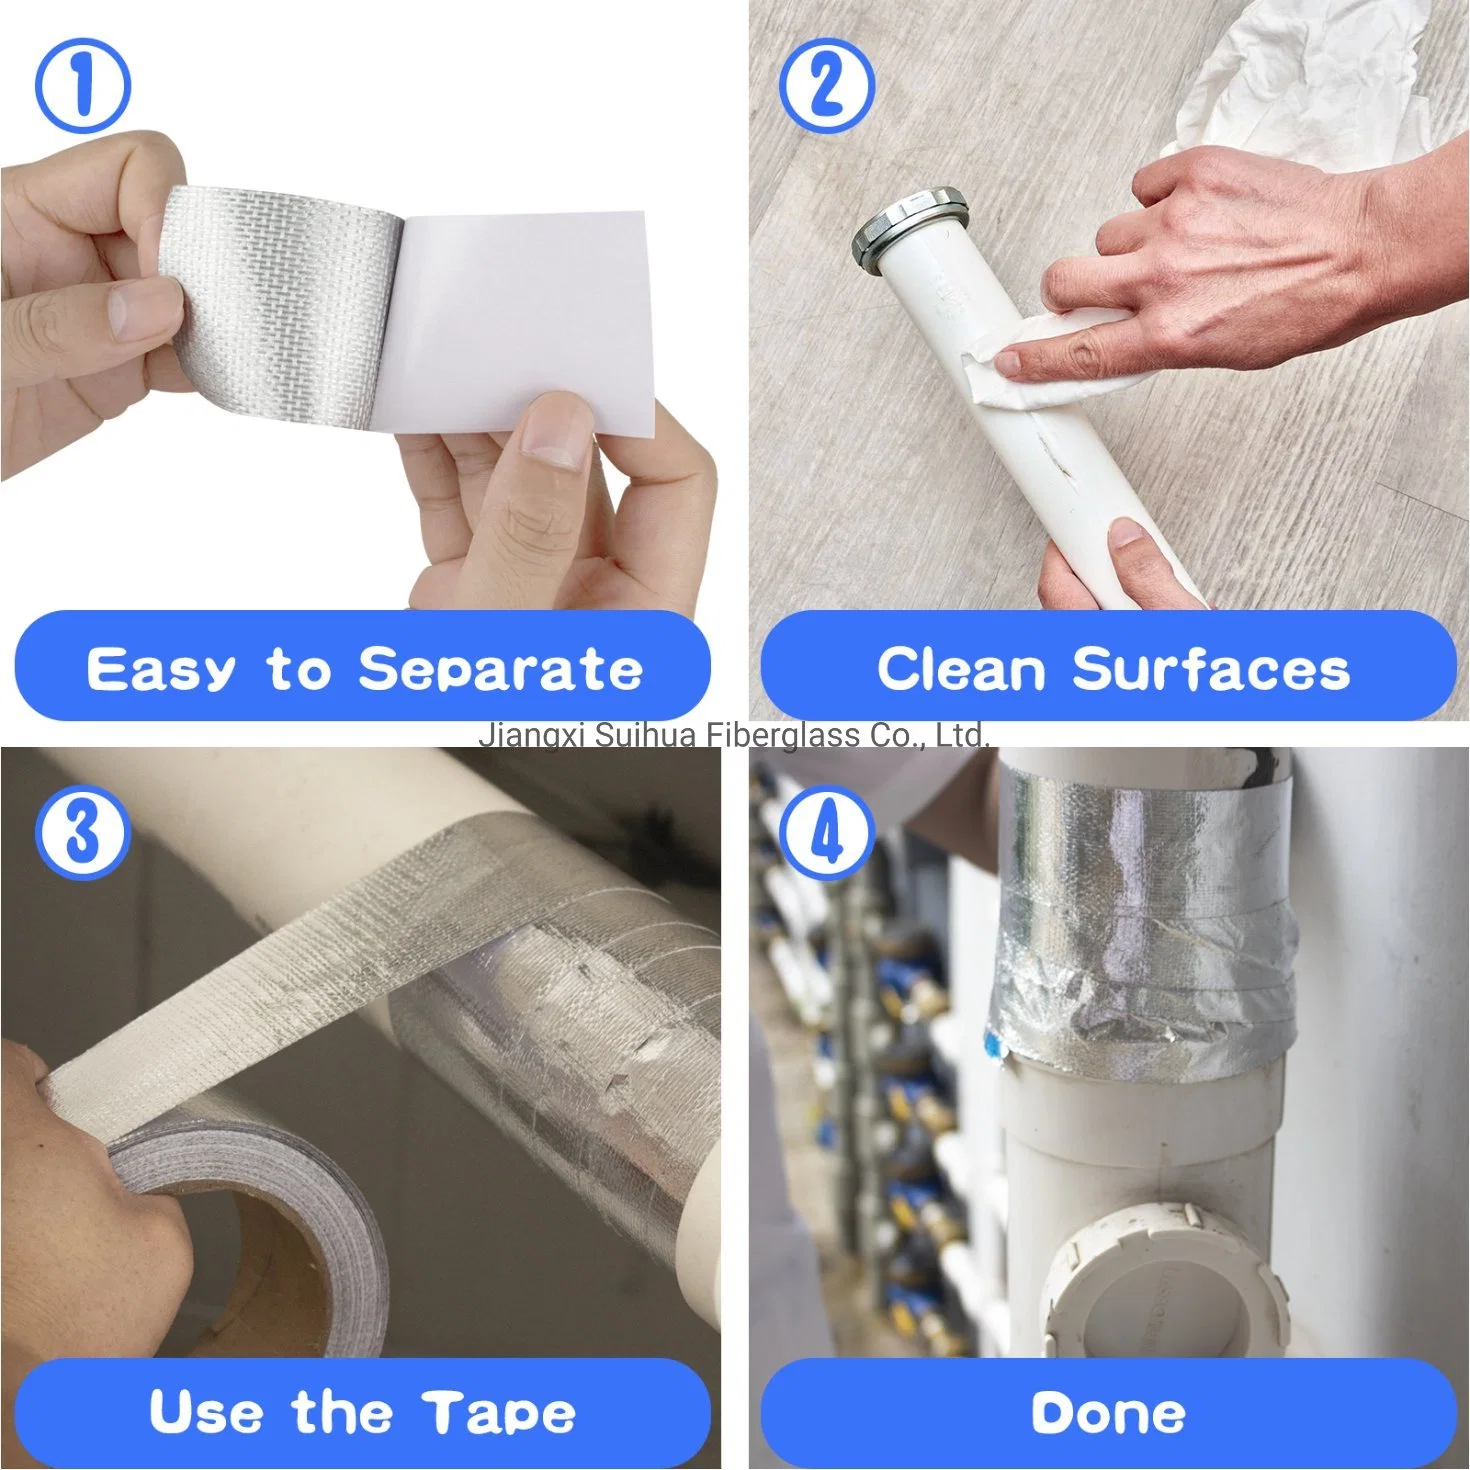 Seaming Against Moisture Aluminum Foil Adhesive Tape for Sealing Joints, Aluminum Air Duct Tape